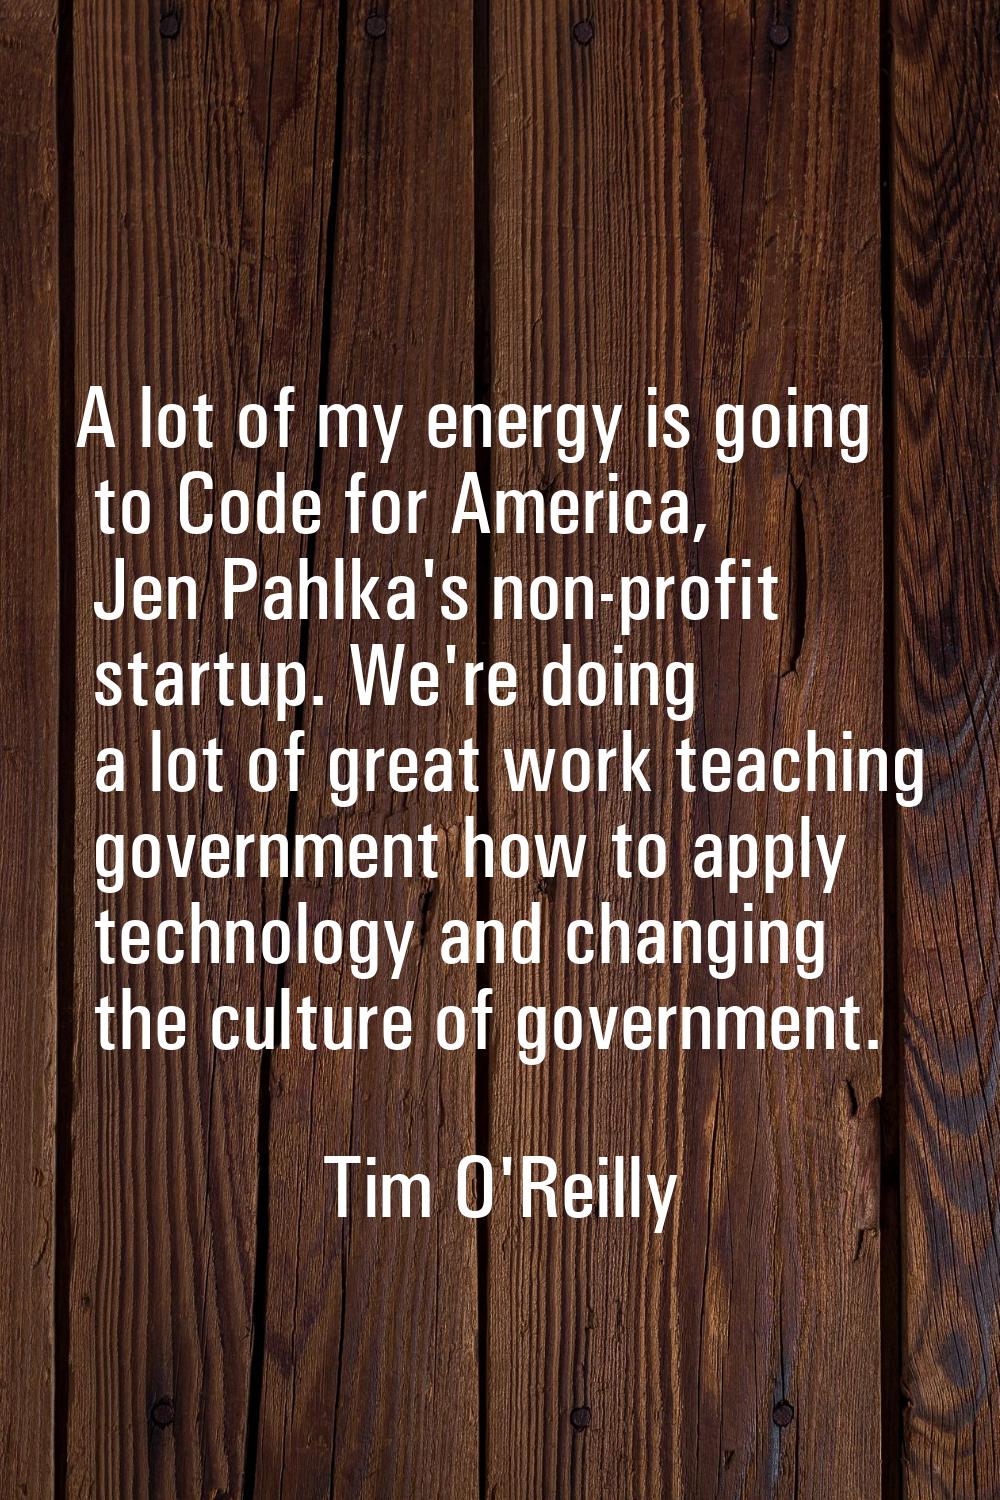 A lot of my energy is going to Code for America, Jen Pahlka's non-profit startup. We're doing a lot